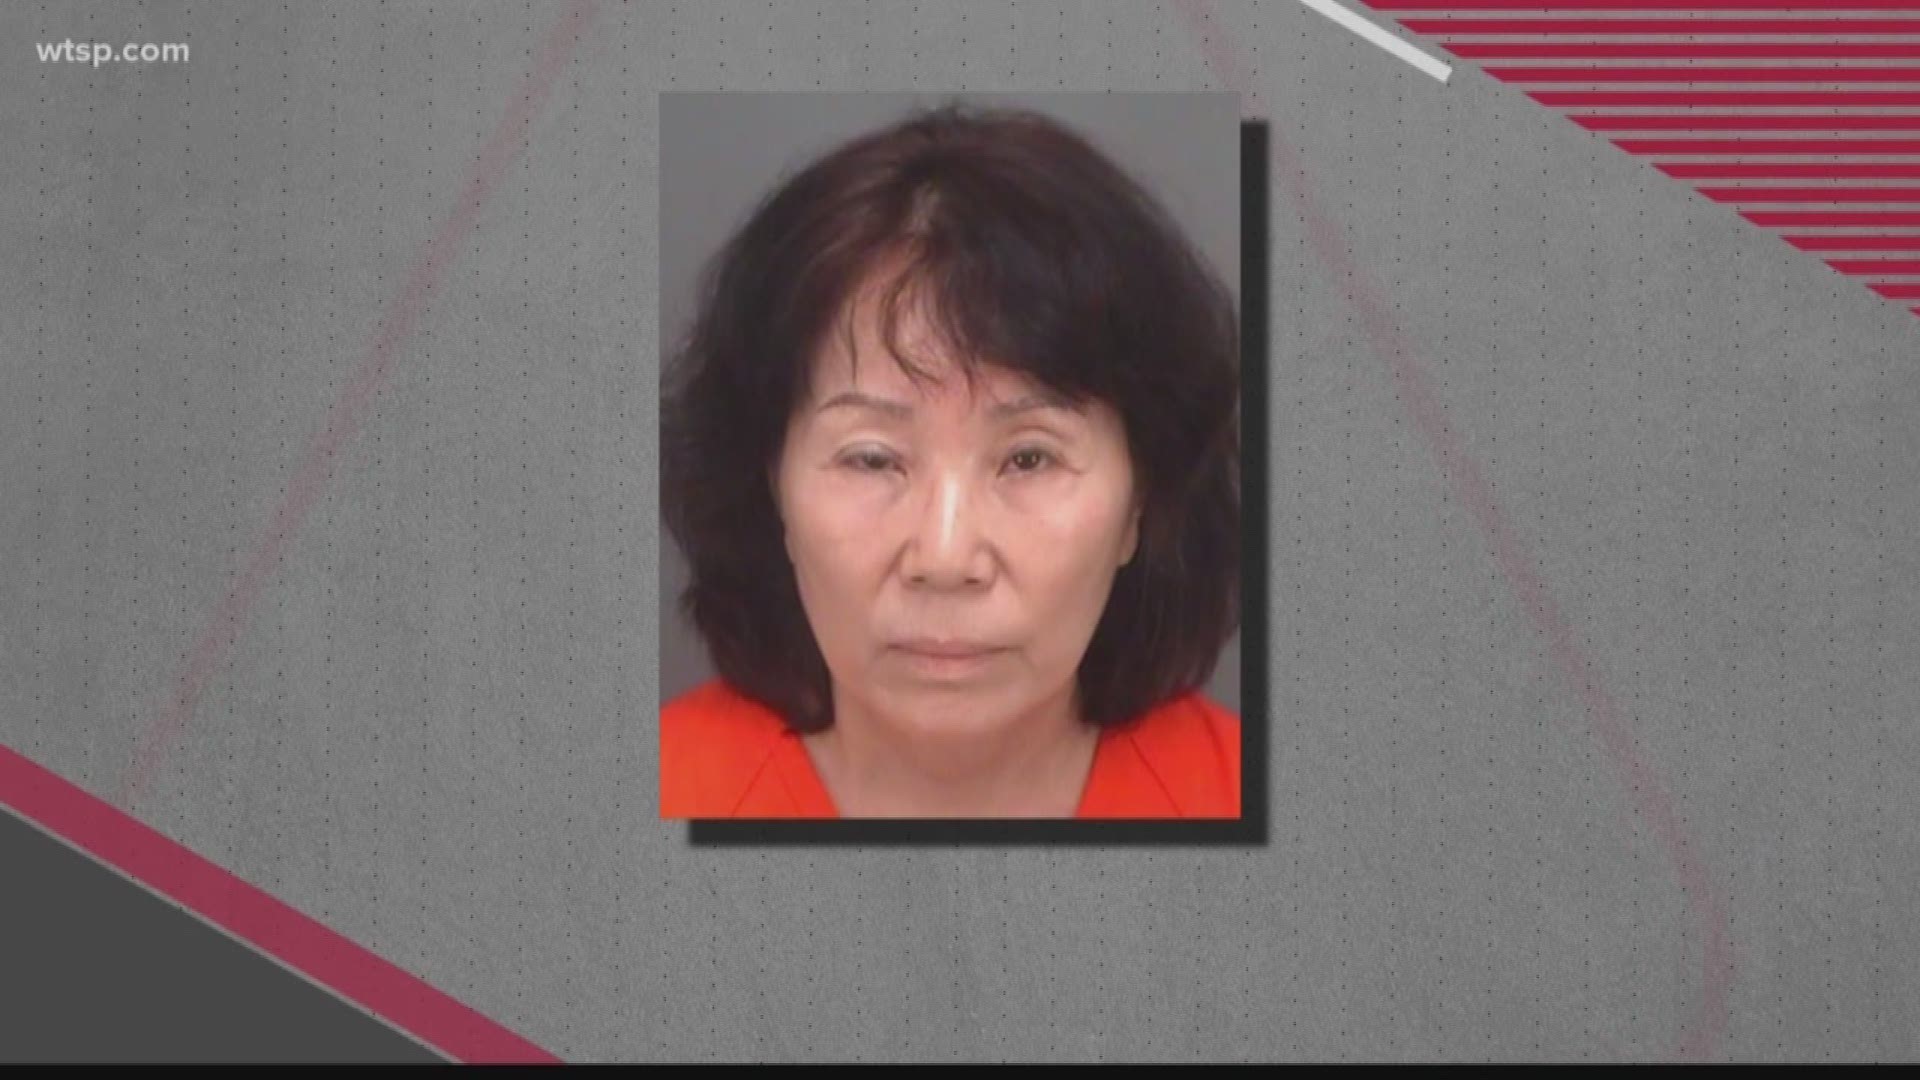 According to an arrest affidavit, Jung Soon Wypcha, 66, was seen using the bathroom with the door wide open on five different occasions in the back room of the ice cream shop -- beginning June 17. In each incident, the affidavit claims she does not wash her hands before walking over to the freezer where the organic ice cream is stored and putting her hands in the containers of ice cream.